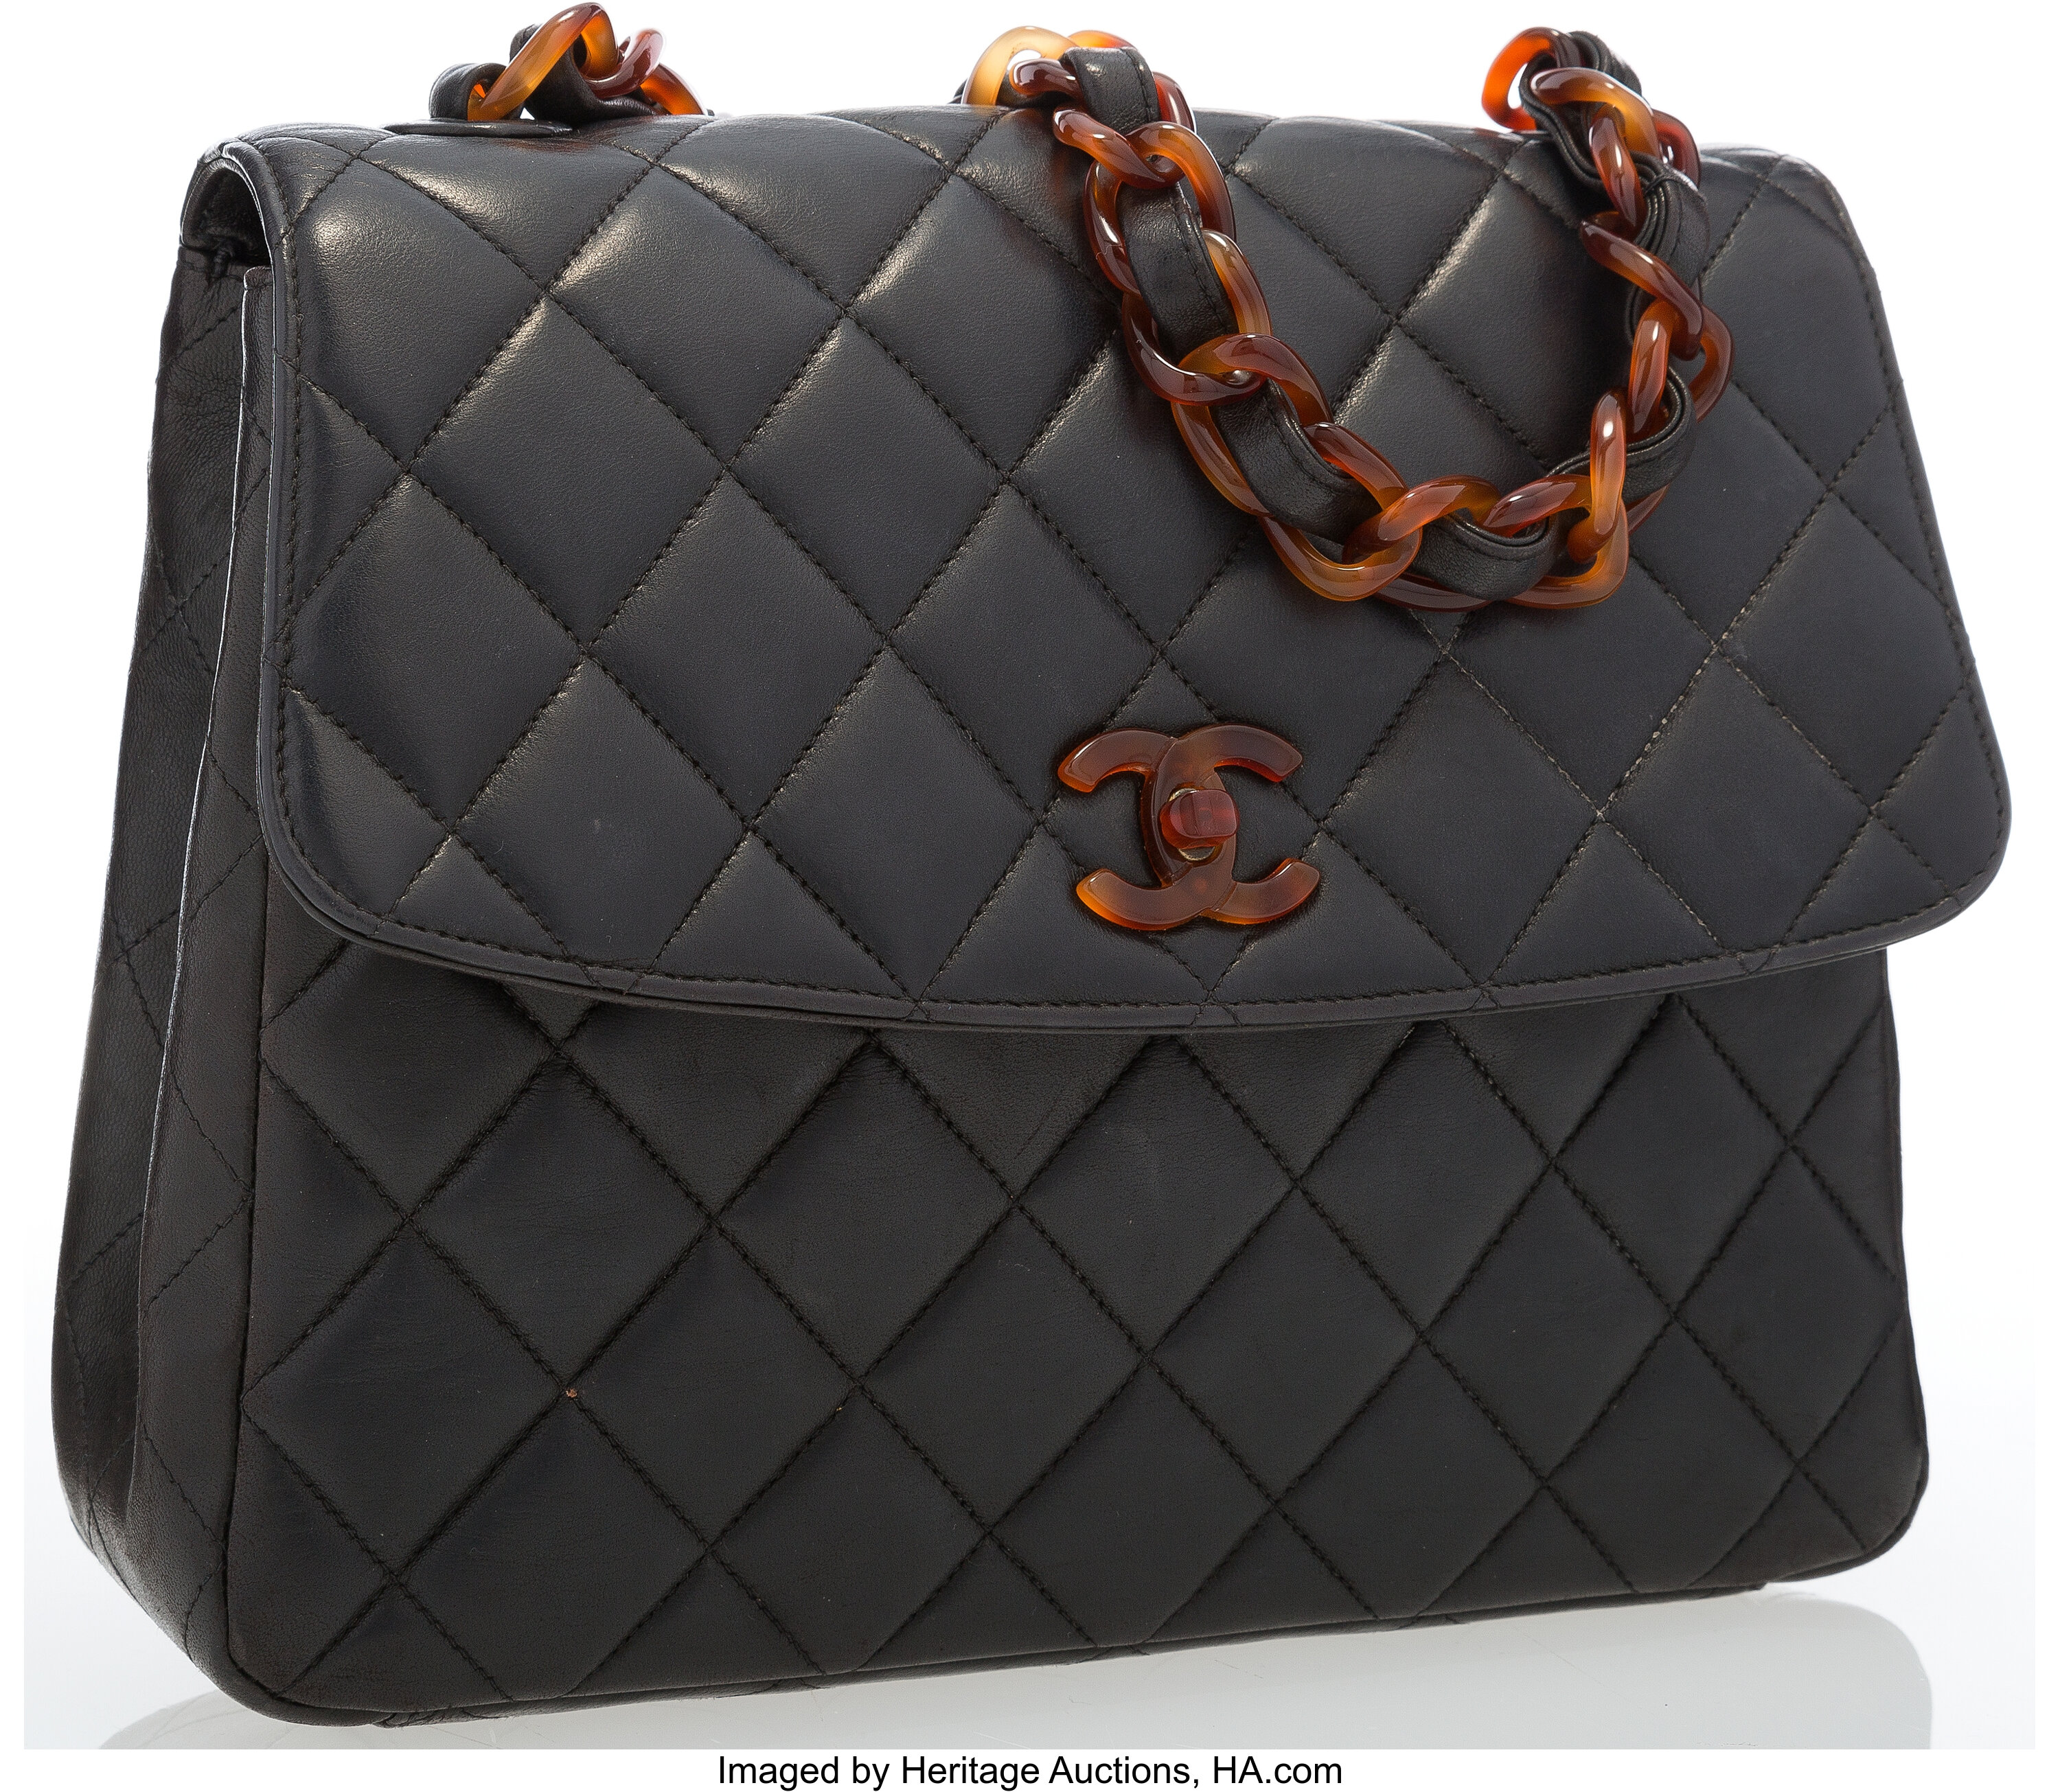 Lot 8 - A Chanel navy quilted lambskin leather flap